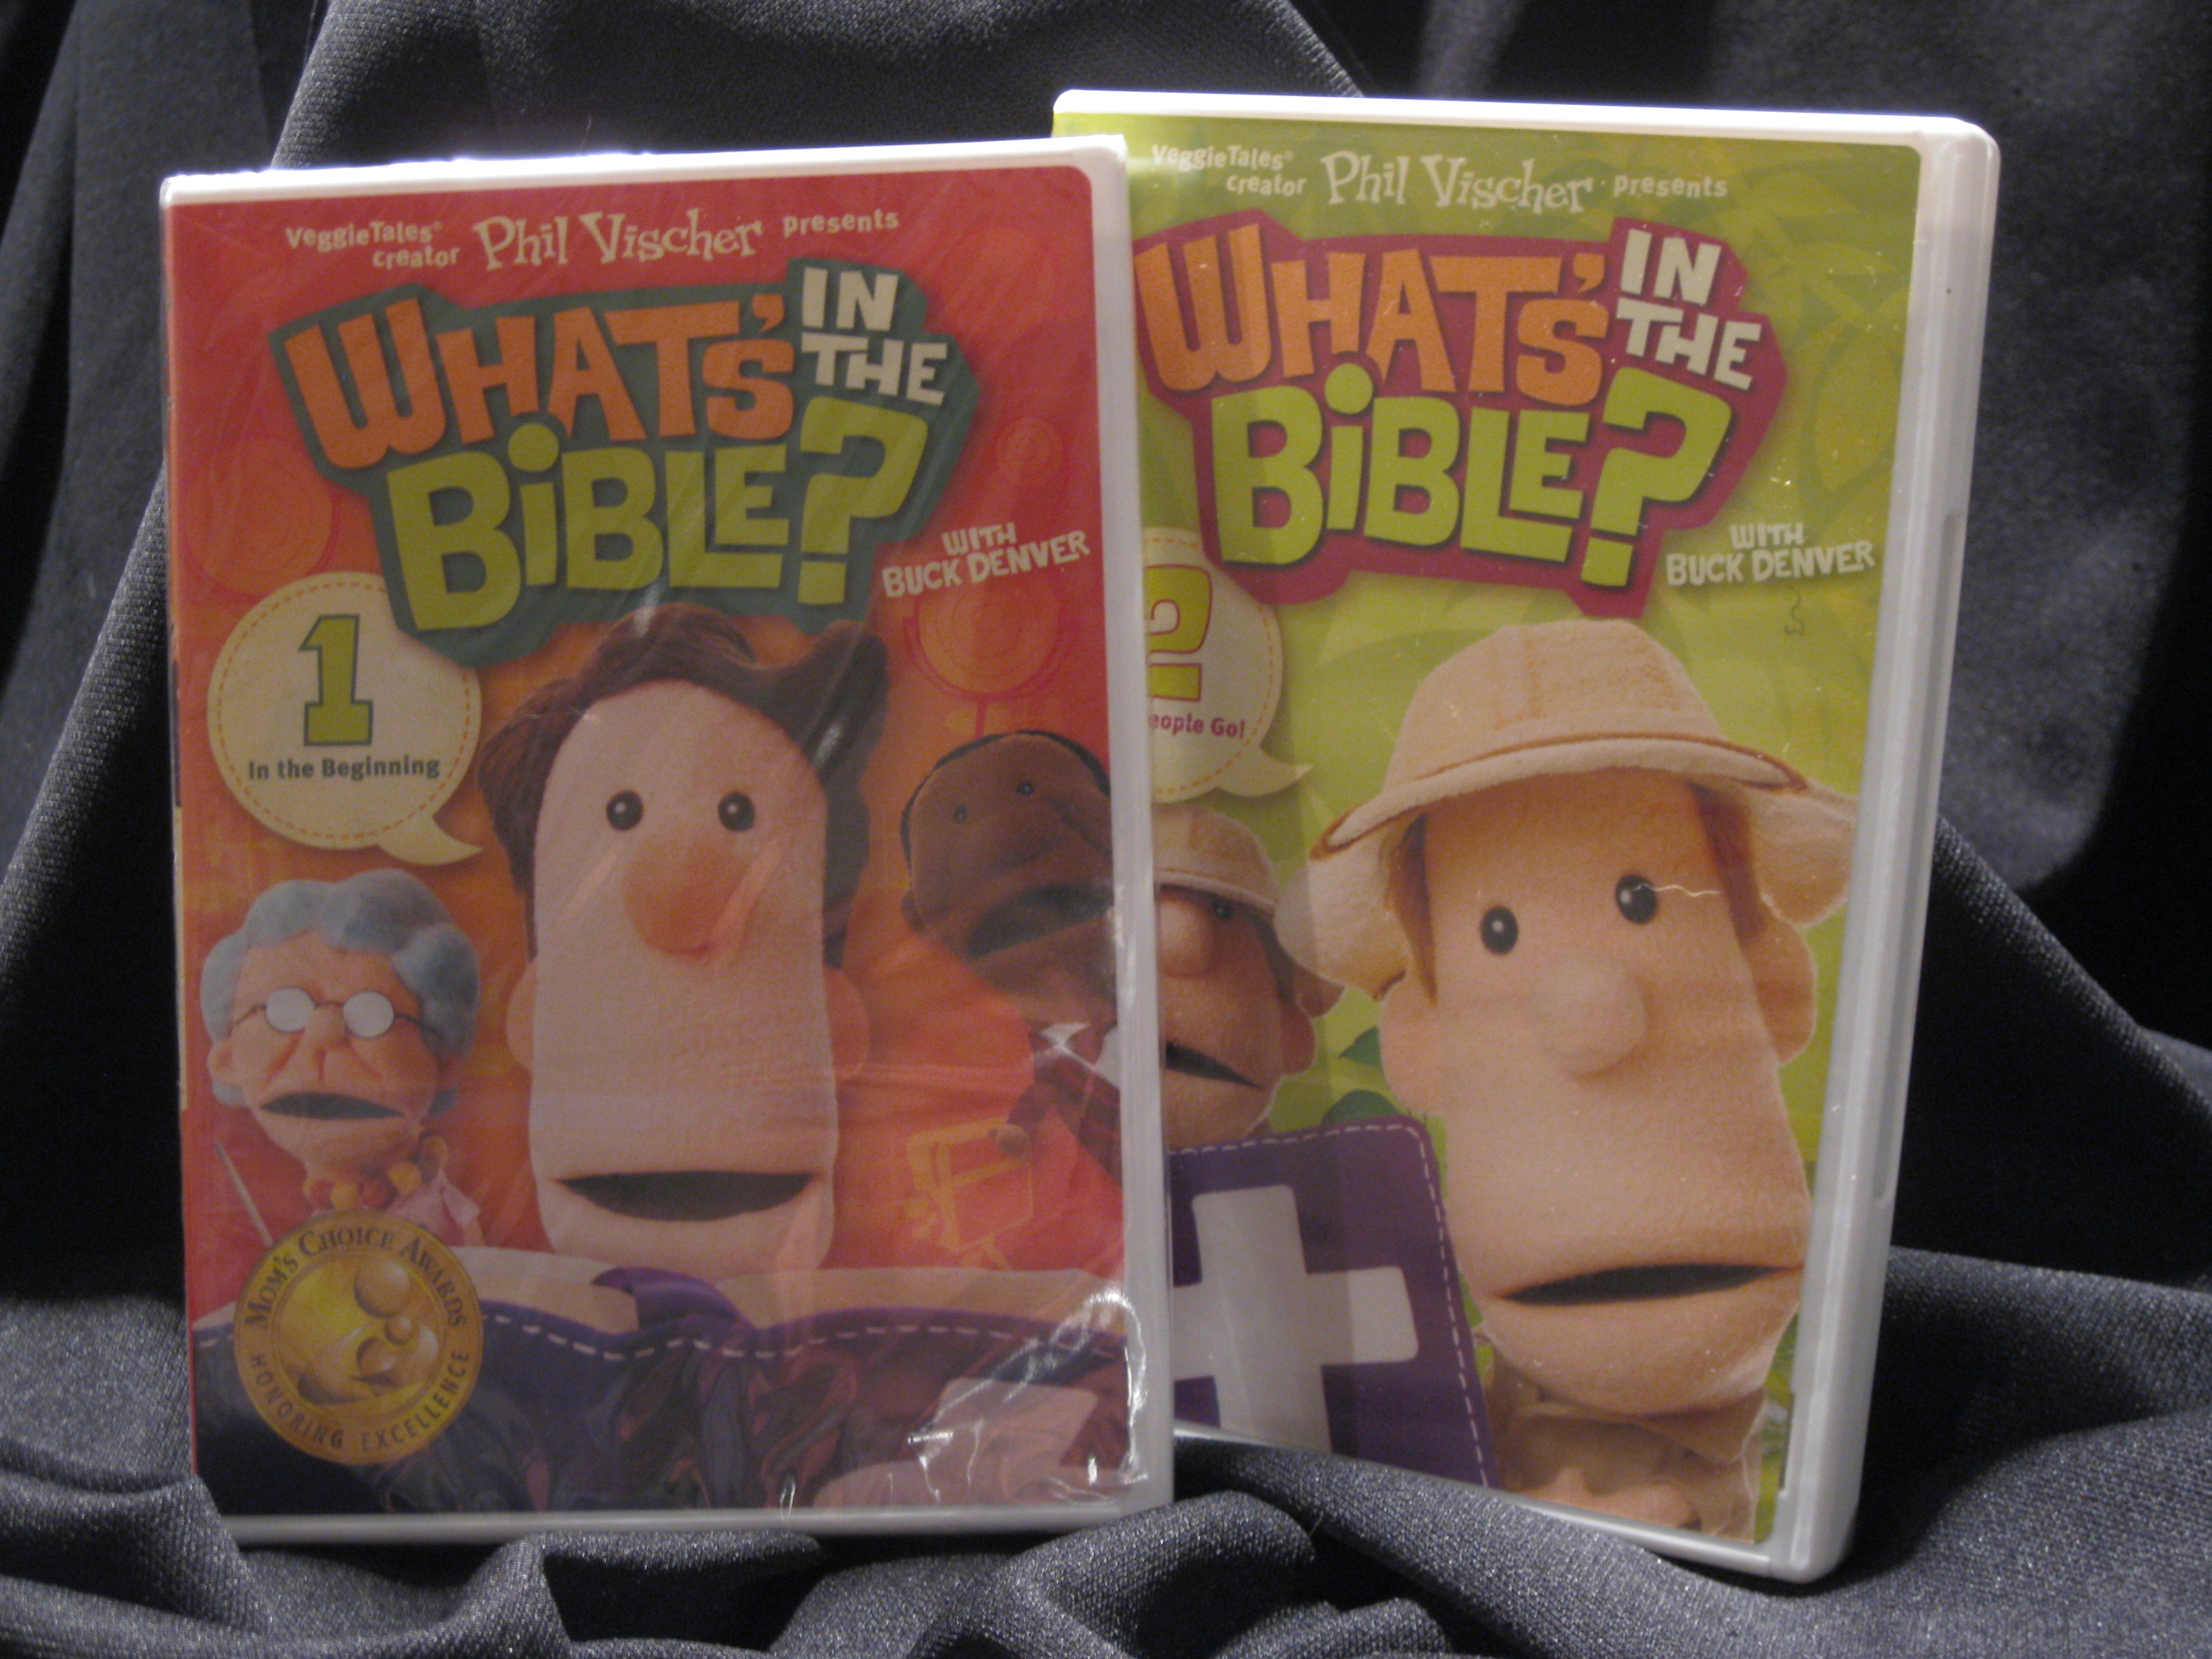 What\'s in the Bible? Part 1 & 2 DVD\'s